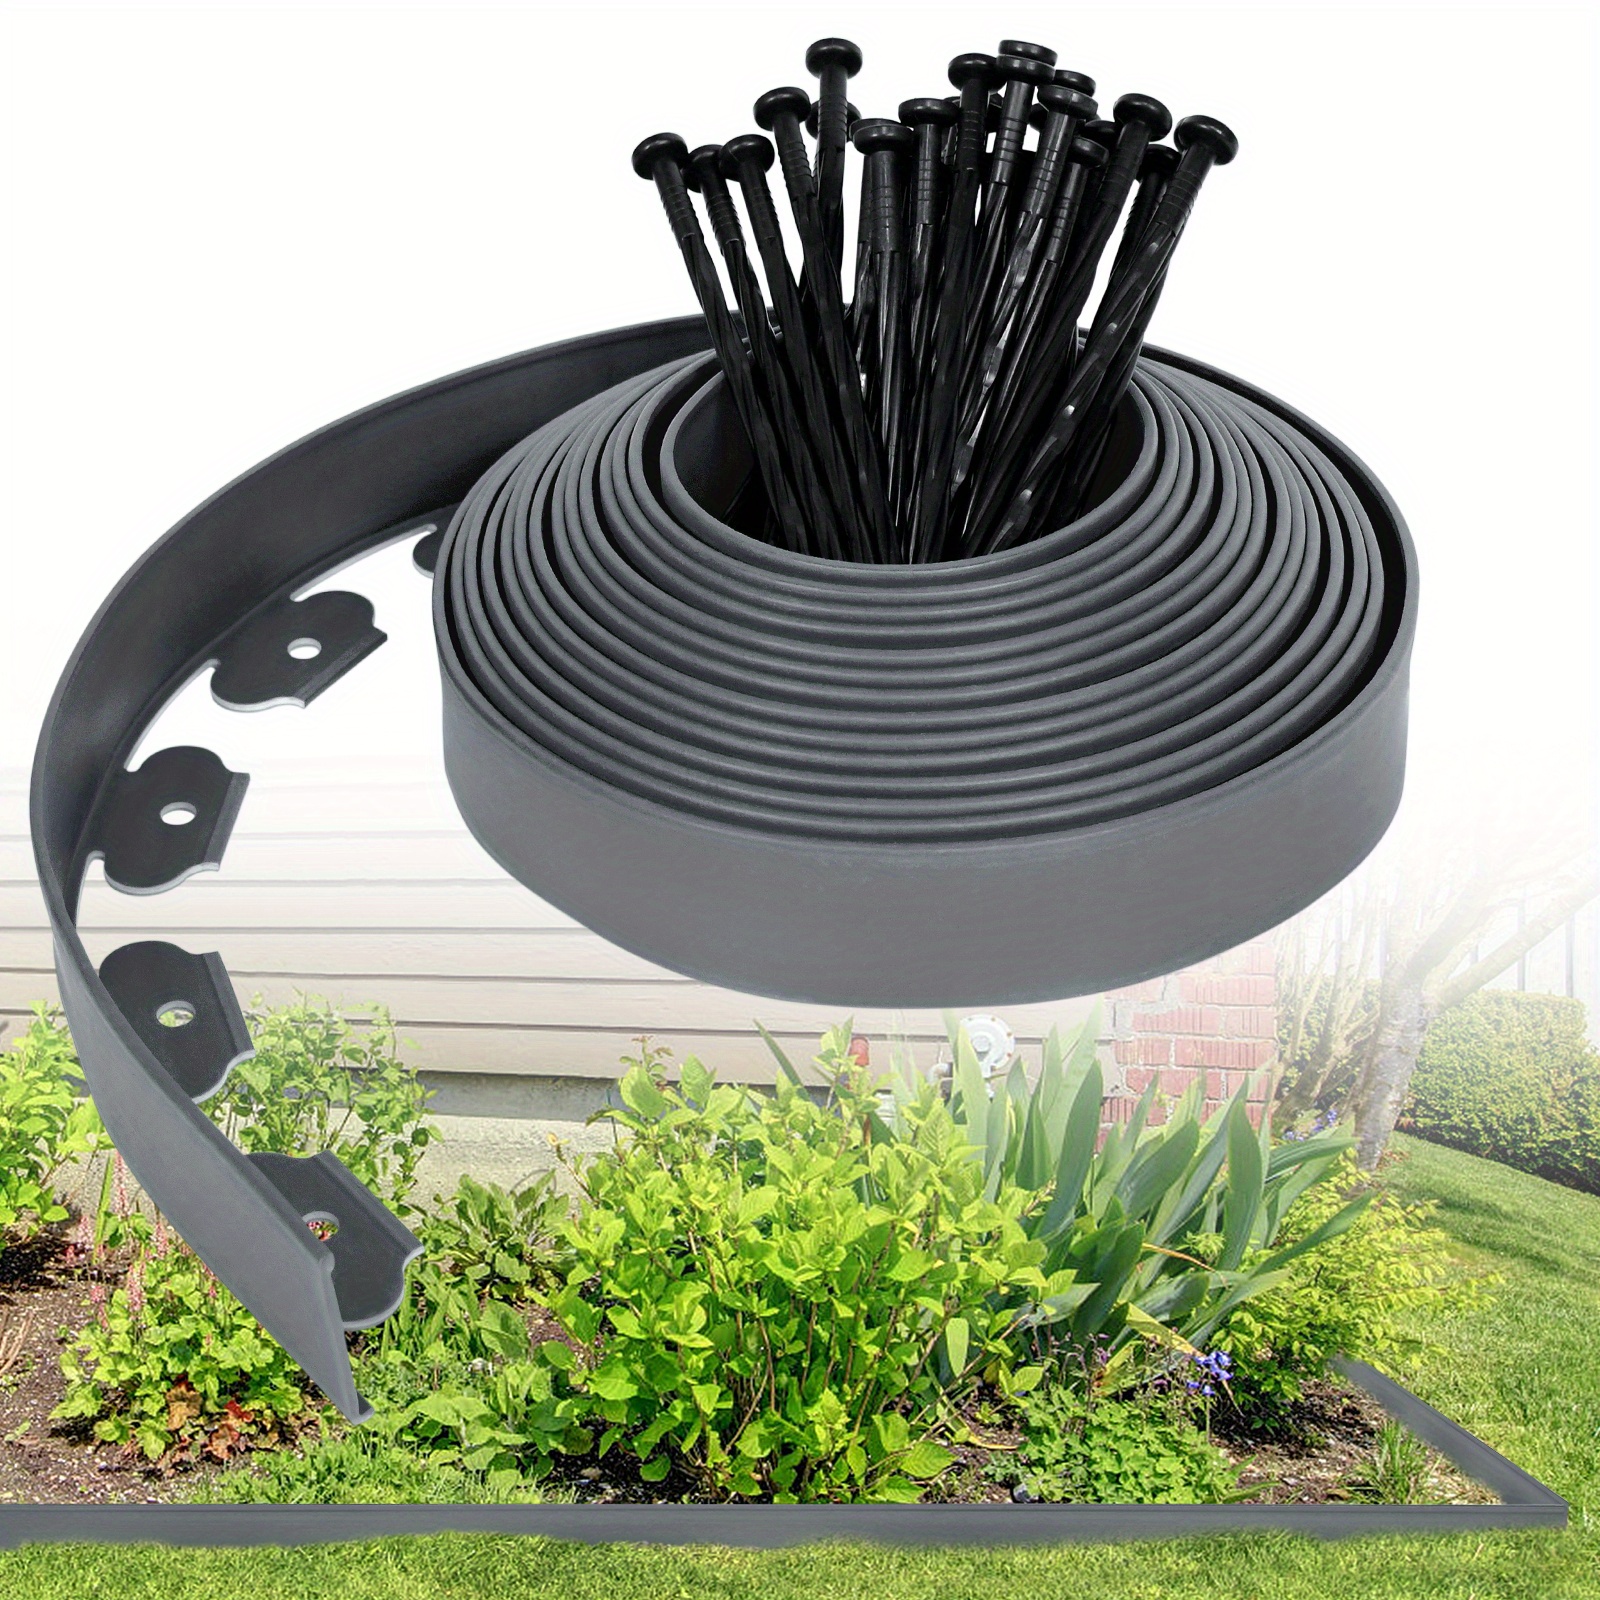 

Aufun Flexible Plastic Lawn Edging 20 M X 5 Cm With 60 Ground Anchors For Anchoring, Flower Bed Border Root Barrier System, Paving Stones Mowing Edge Garden Decorative (grey)